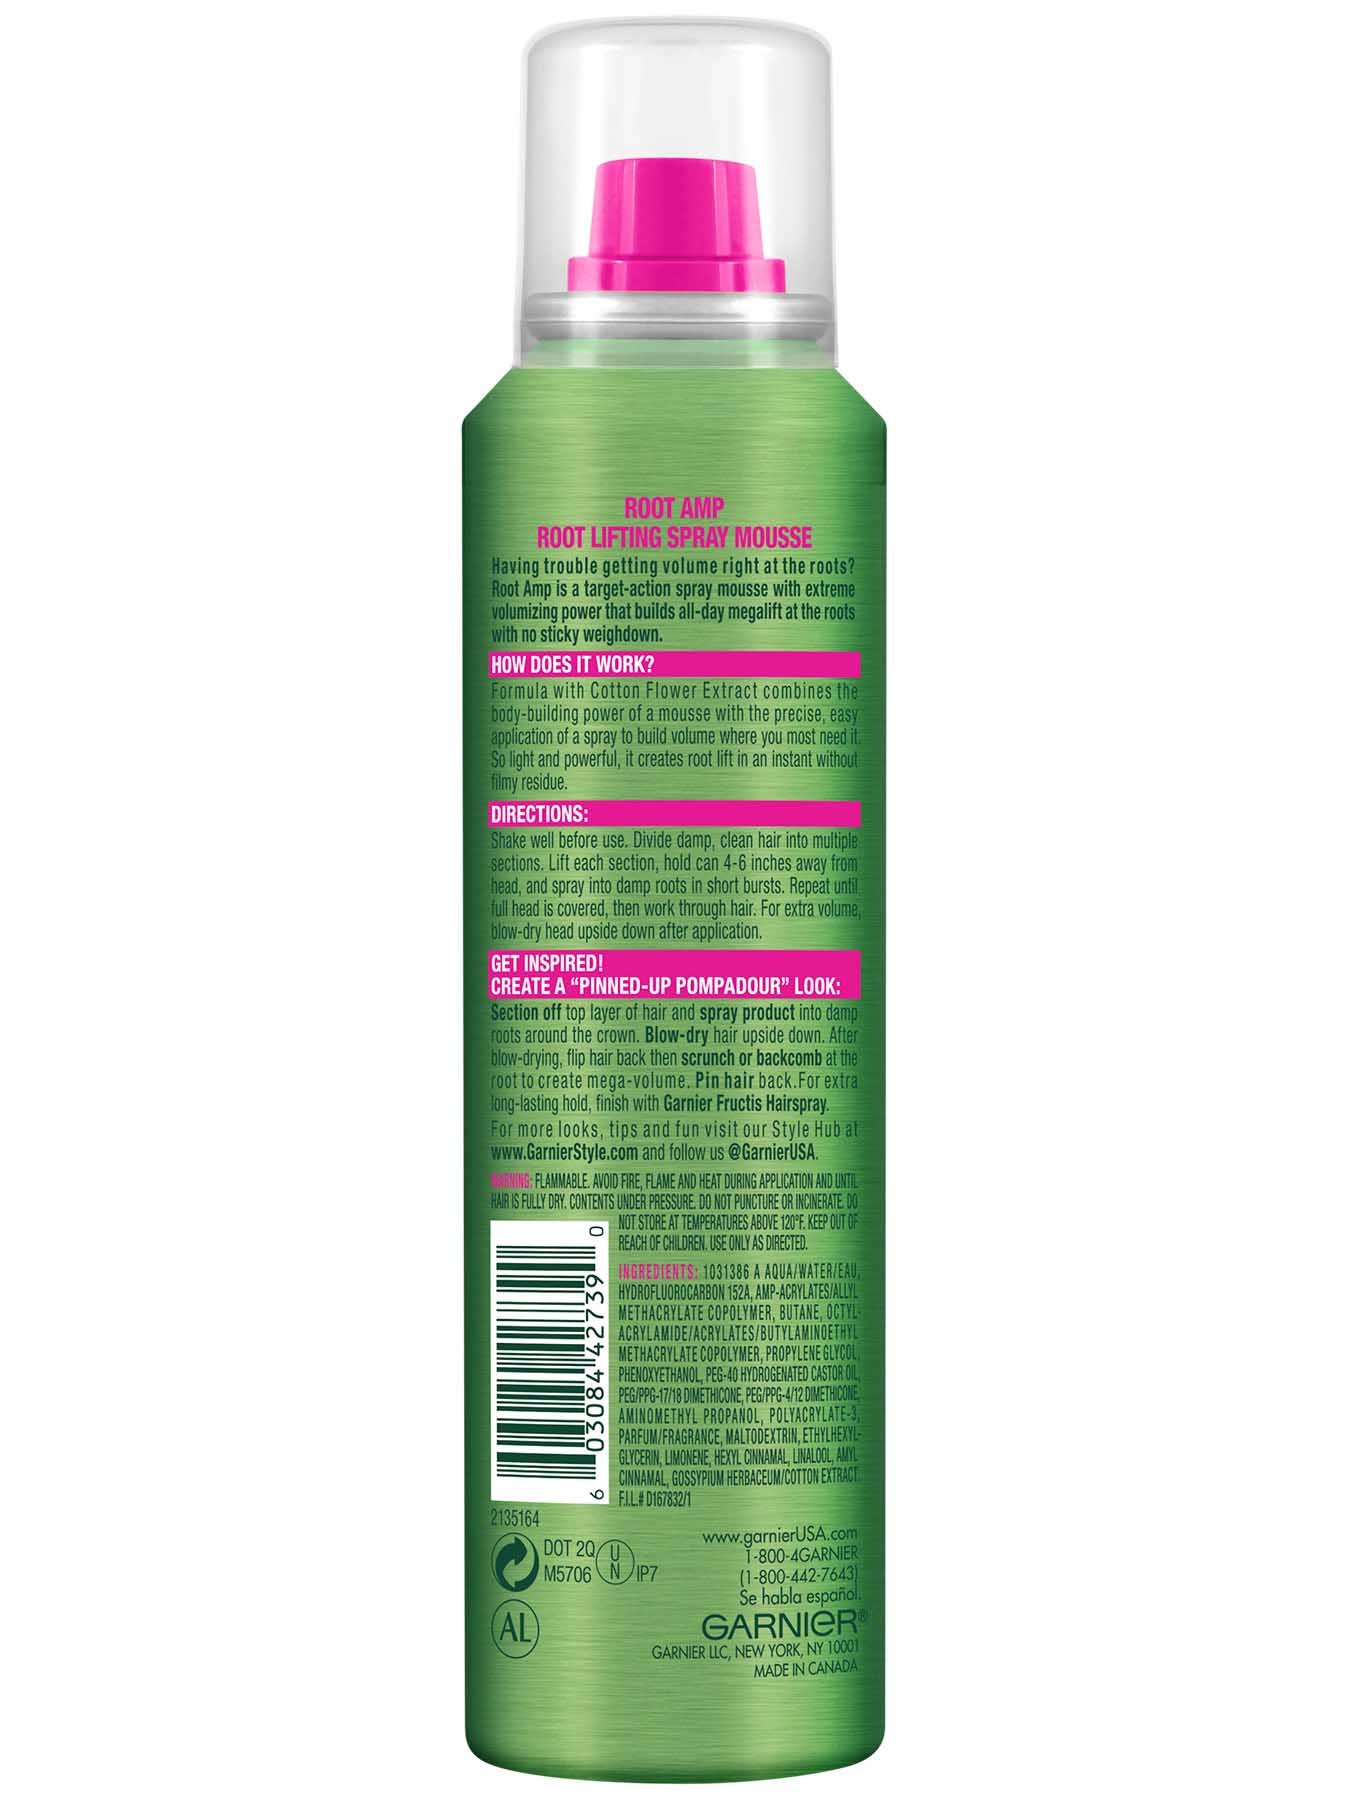 Back view of Root Amp Root Lifting Spray Mousse.